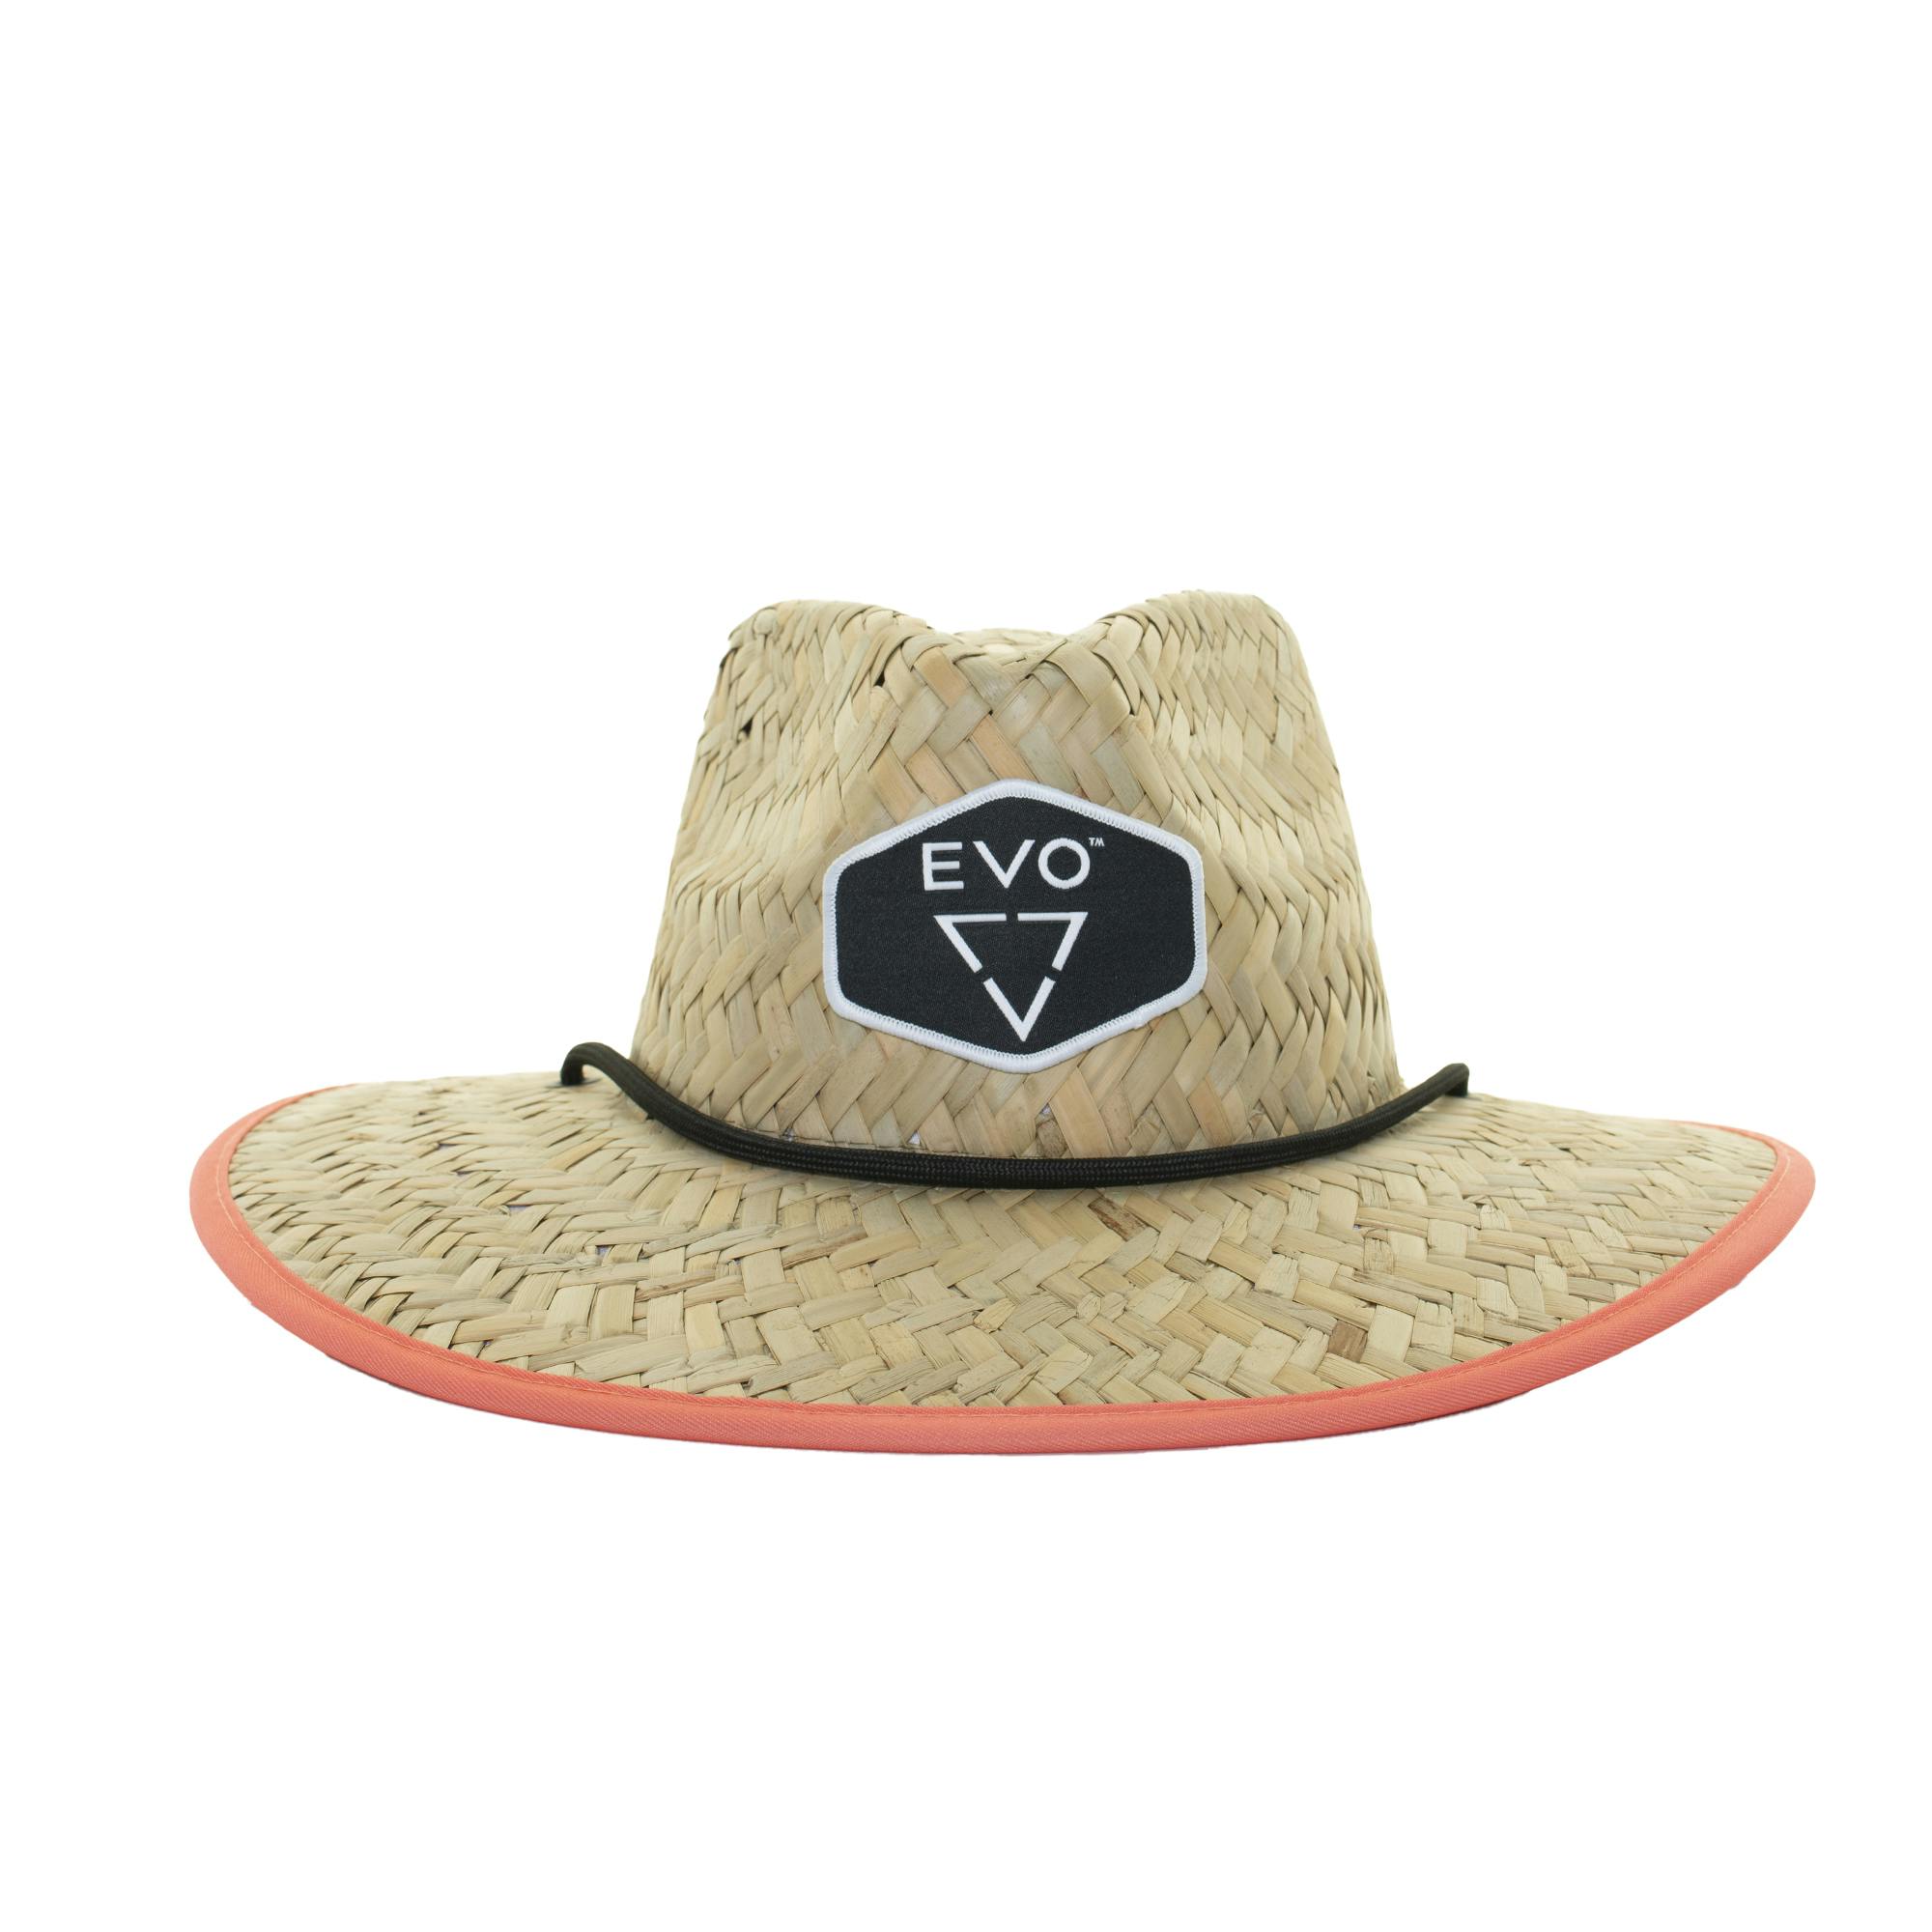 EVO Straw Lifeguard Hat - Jetty Coral (Women's) Front View